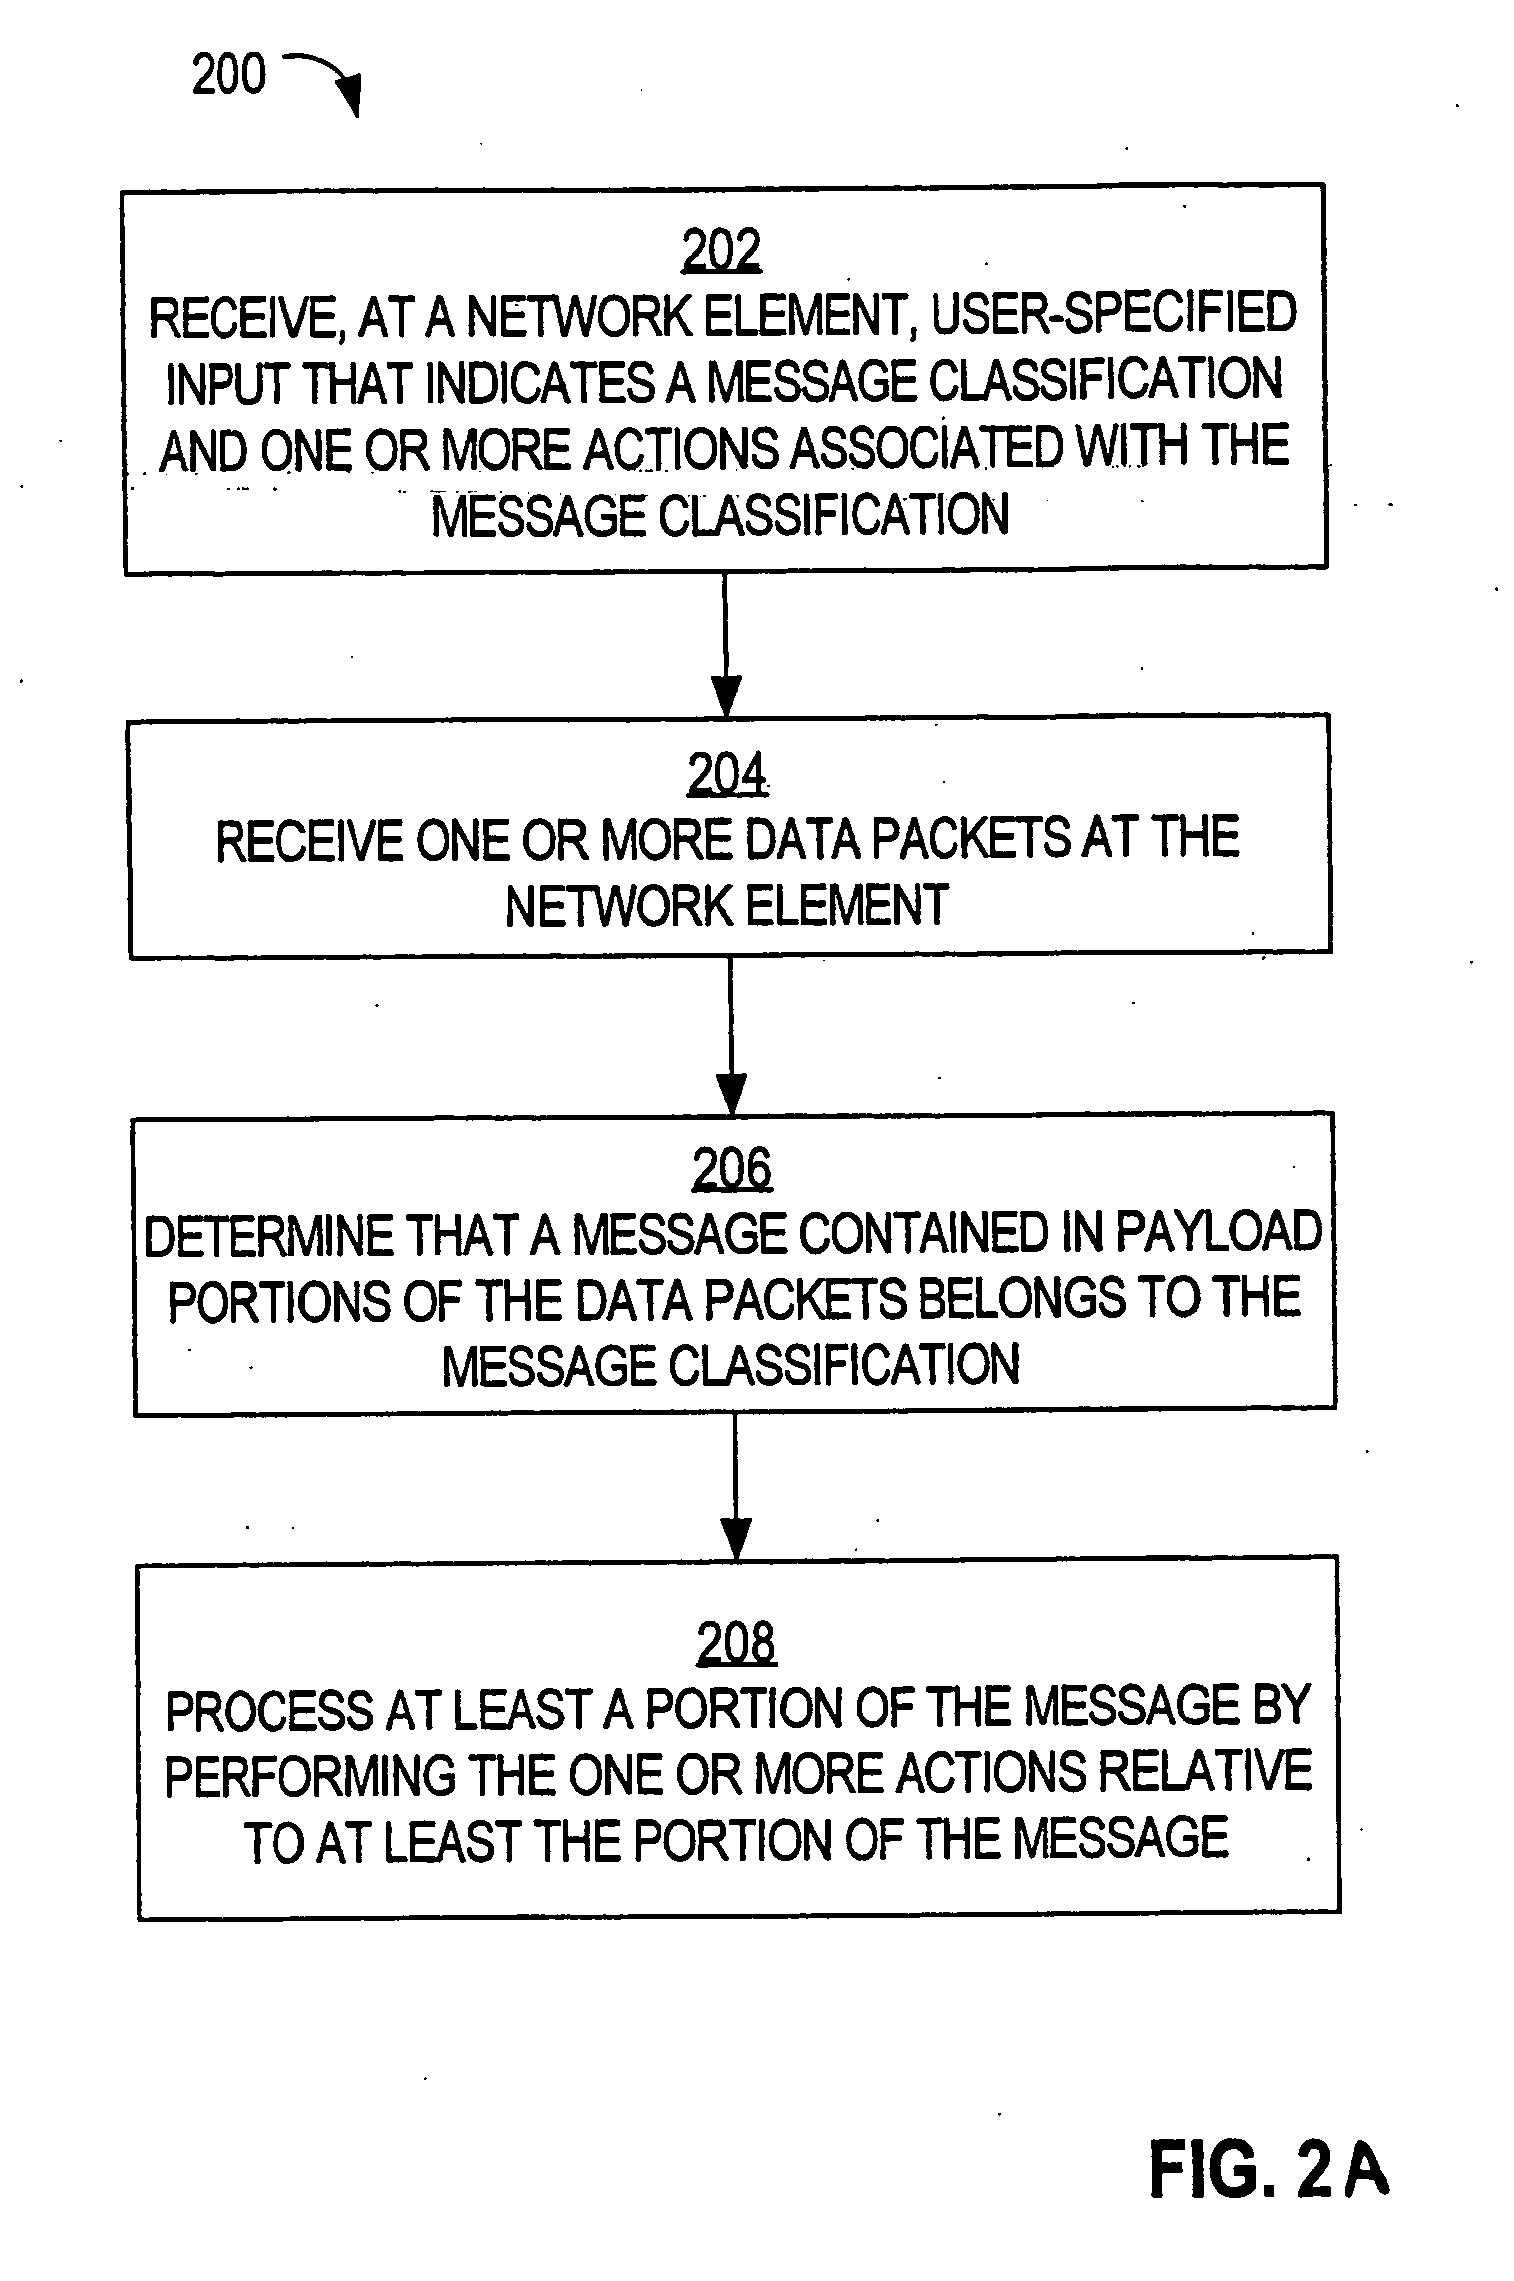 Network based device for providing RFID middleware functionality